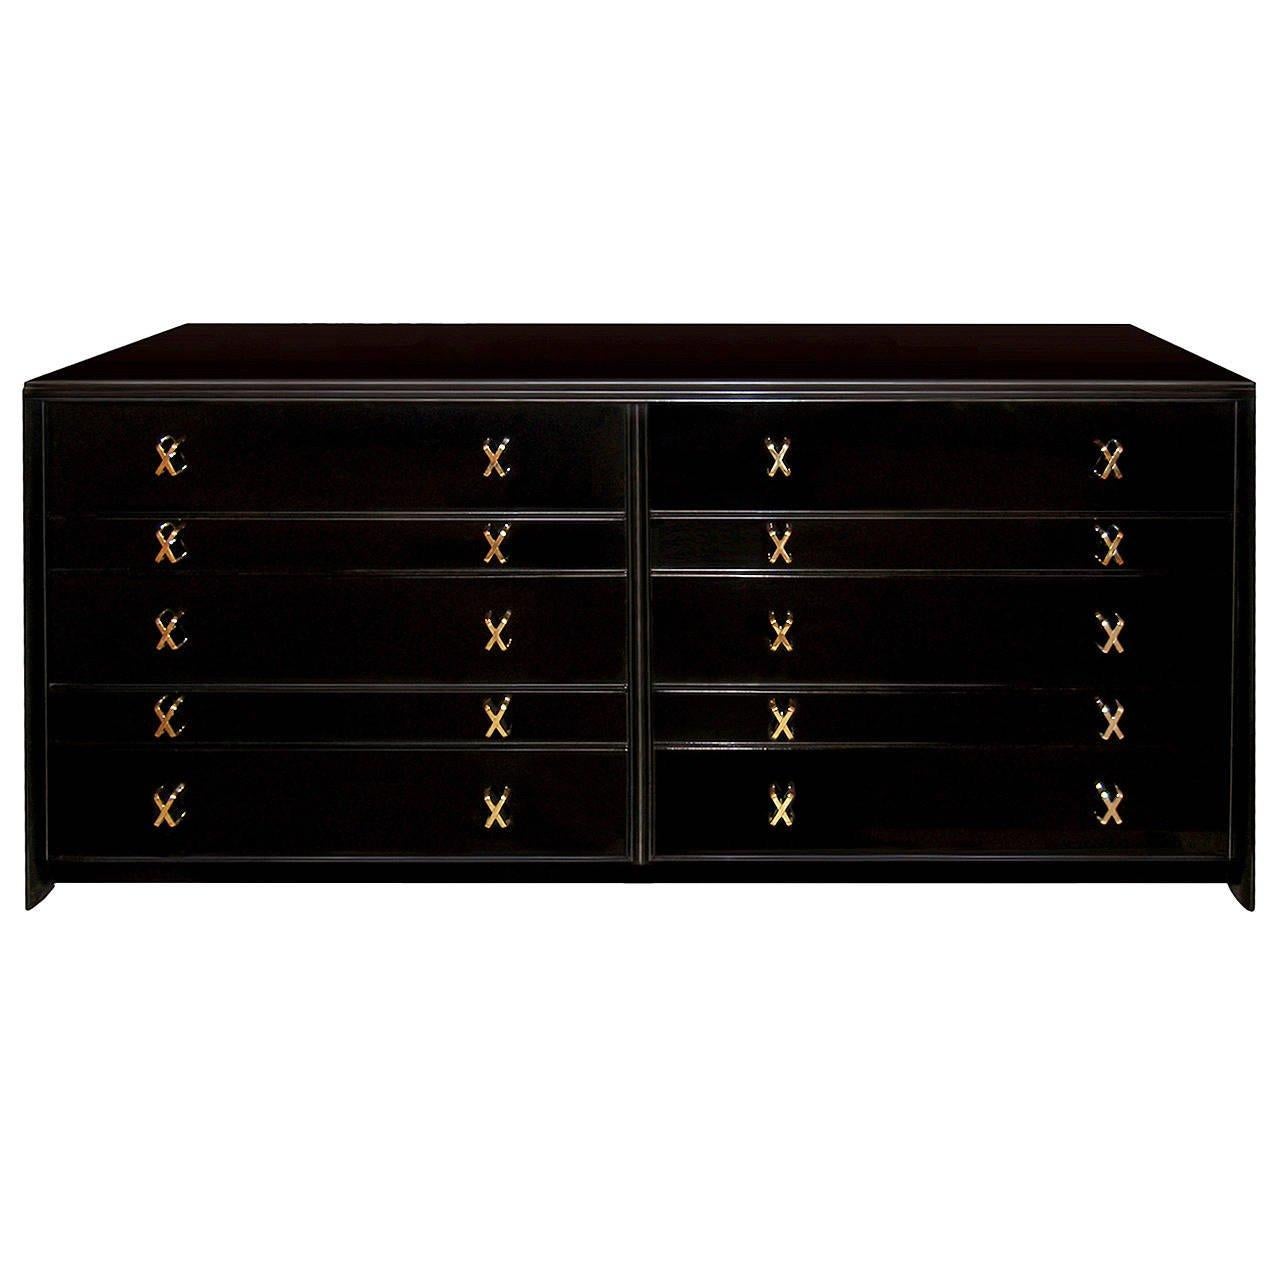 An ebonized walnut ten-drawer dresser with solid brass X-pulls by Paul Frankl.

American, Circa 1940's

This item is in stock.